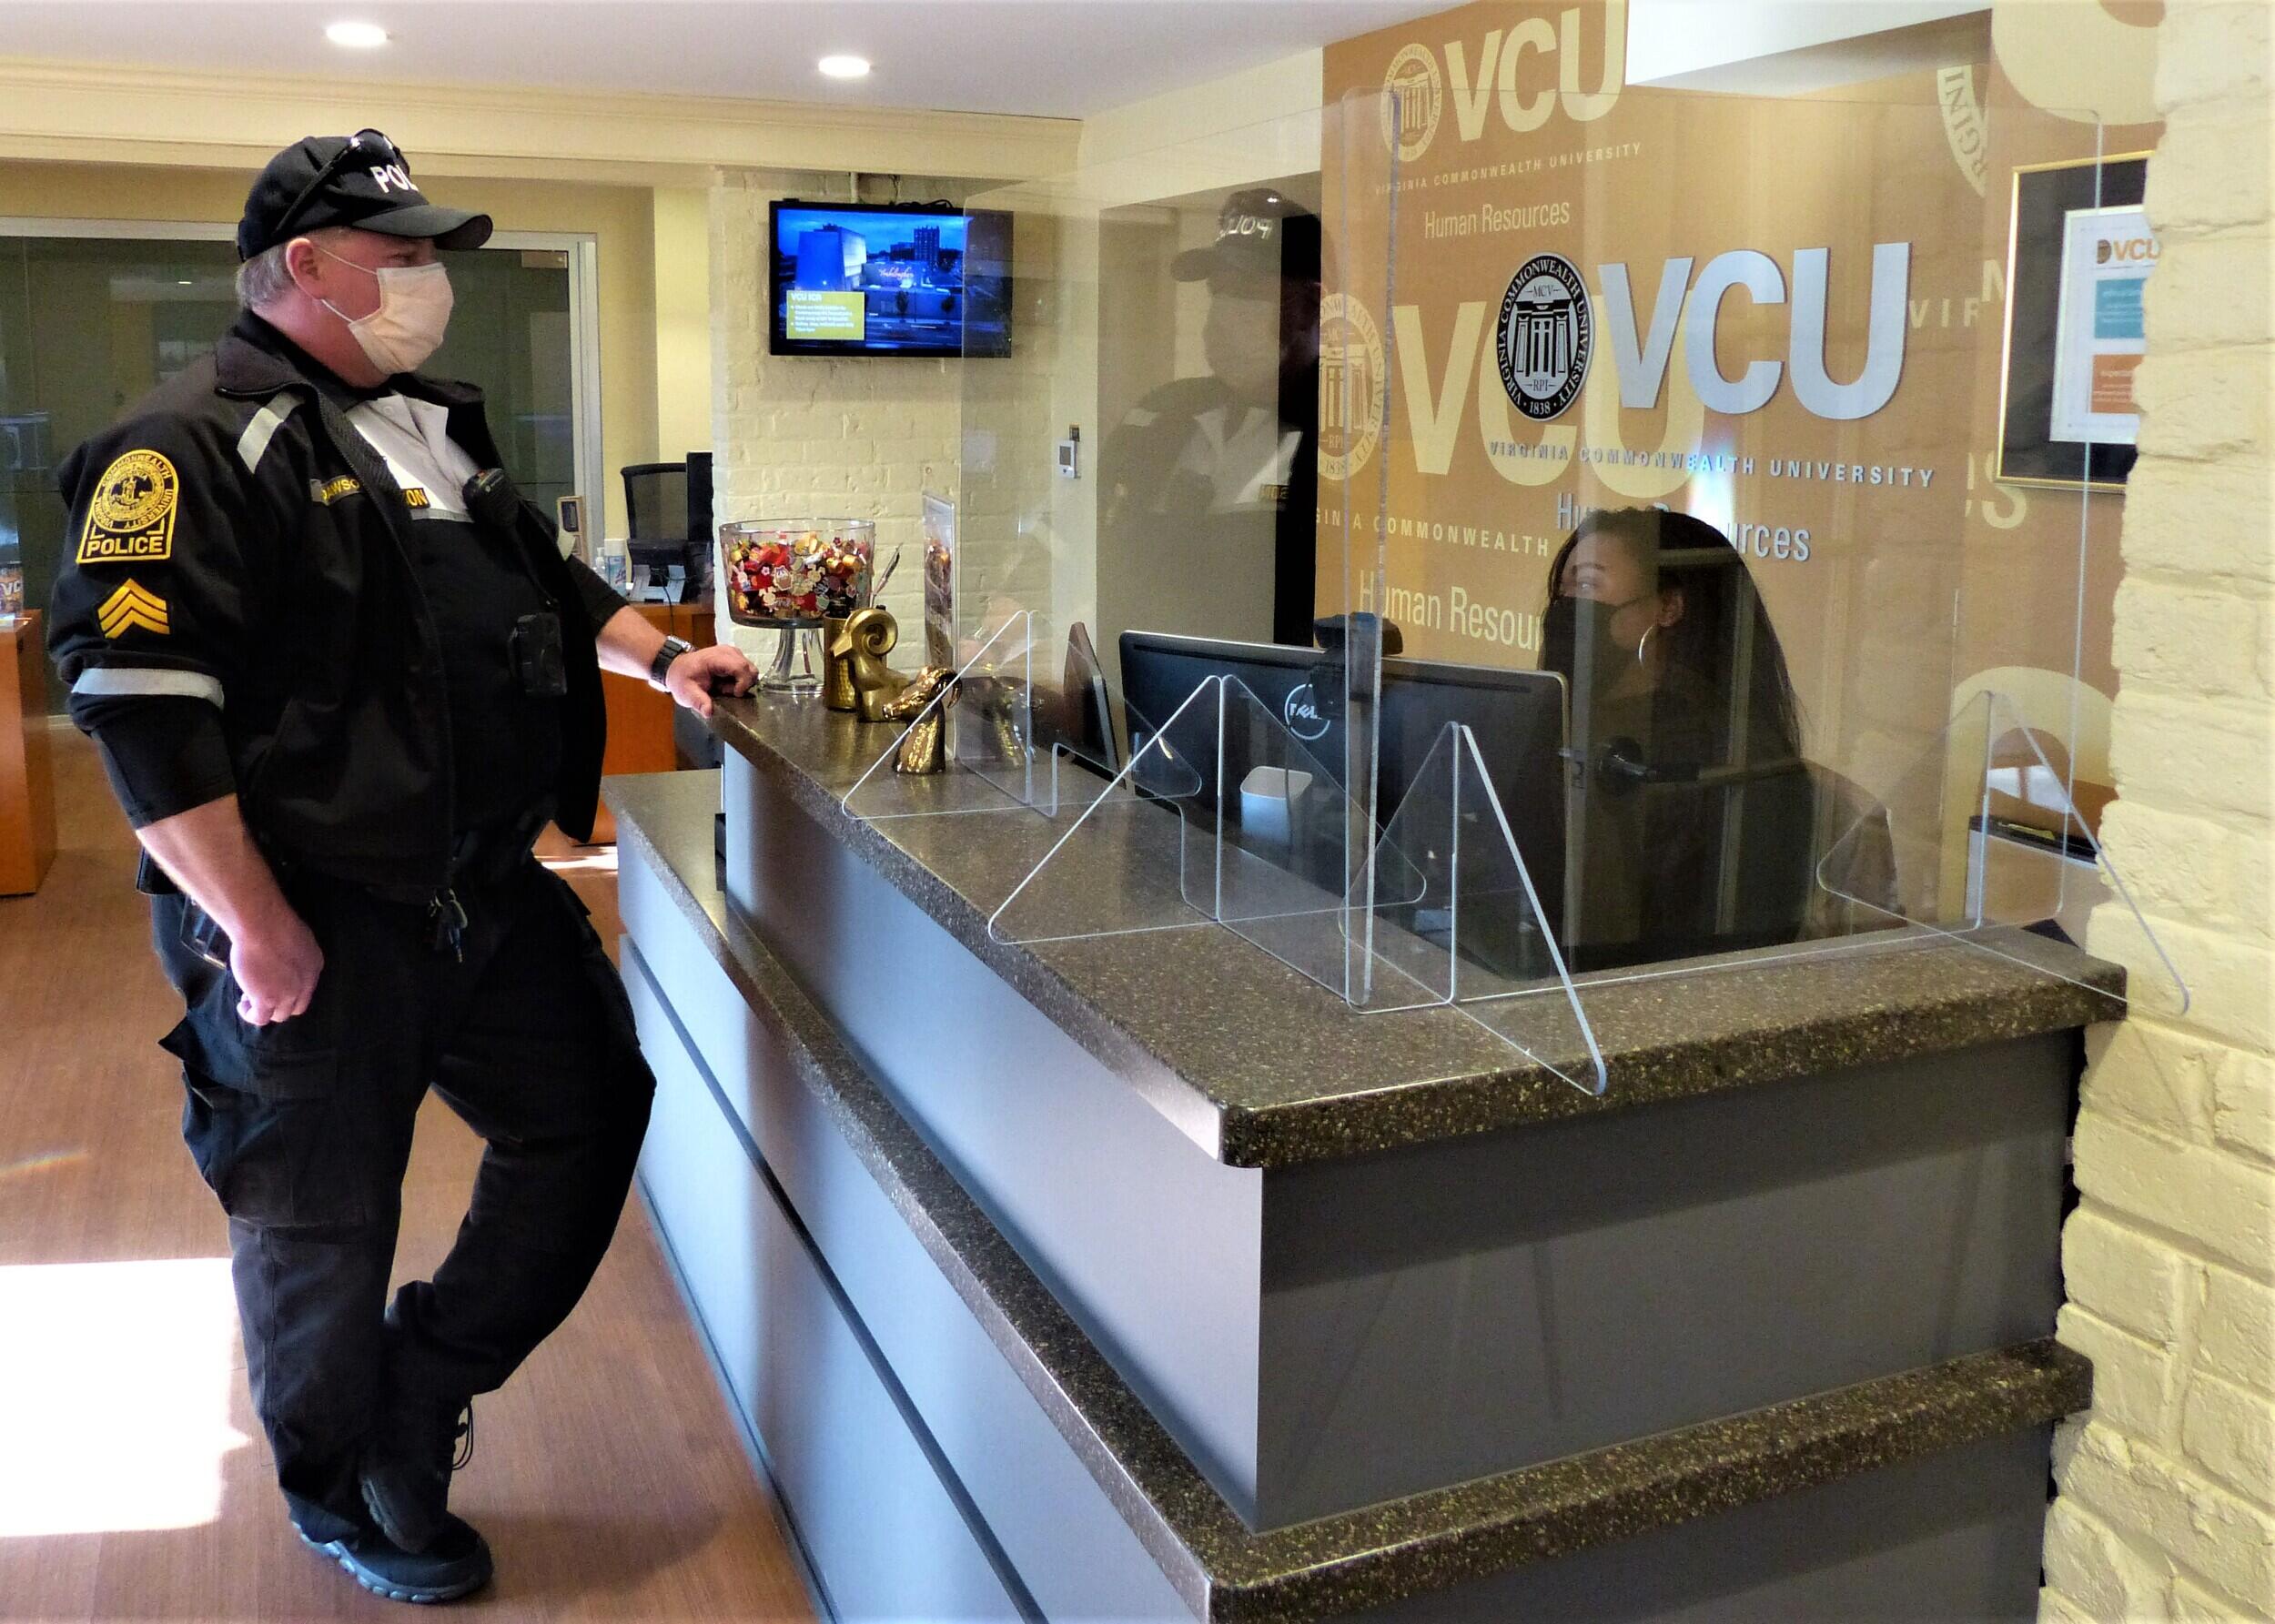 VCU police officer stands in front of reception desk speaking with woman sitting at the desk.